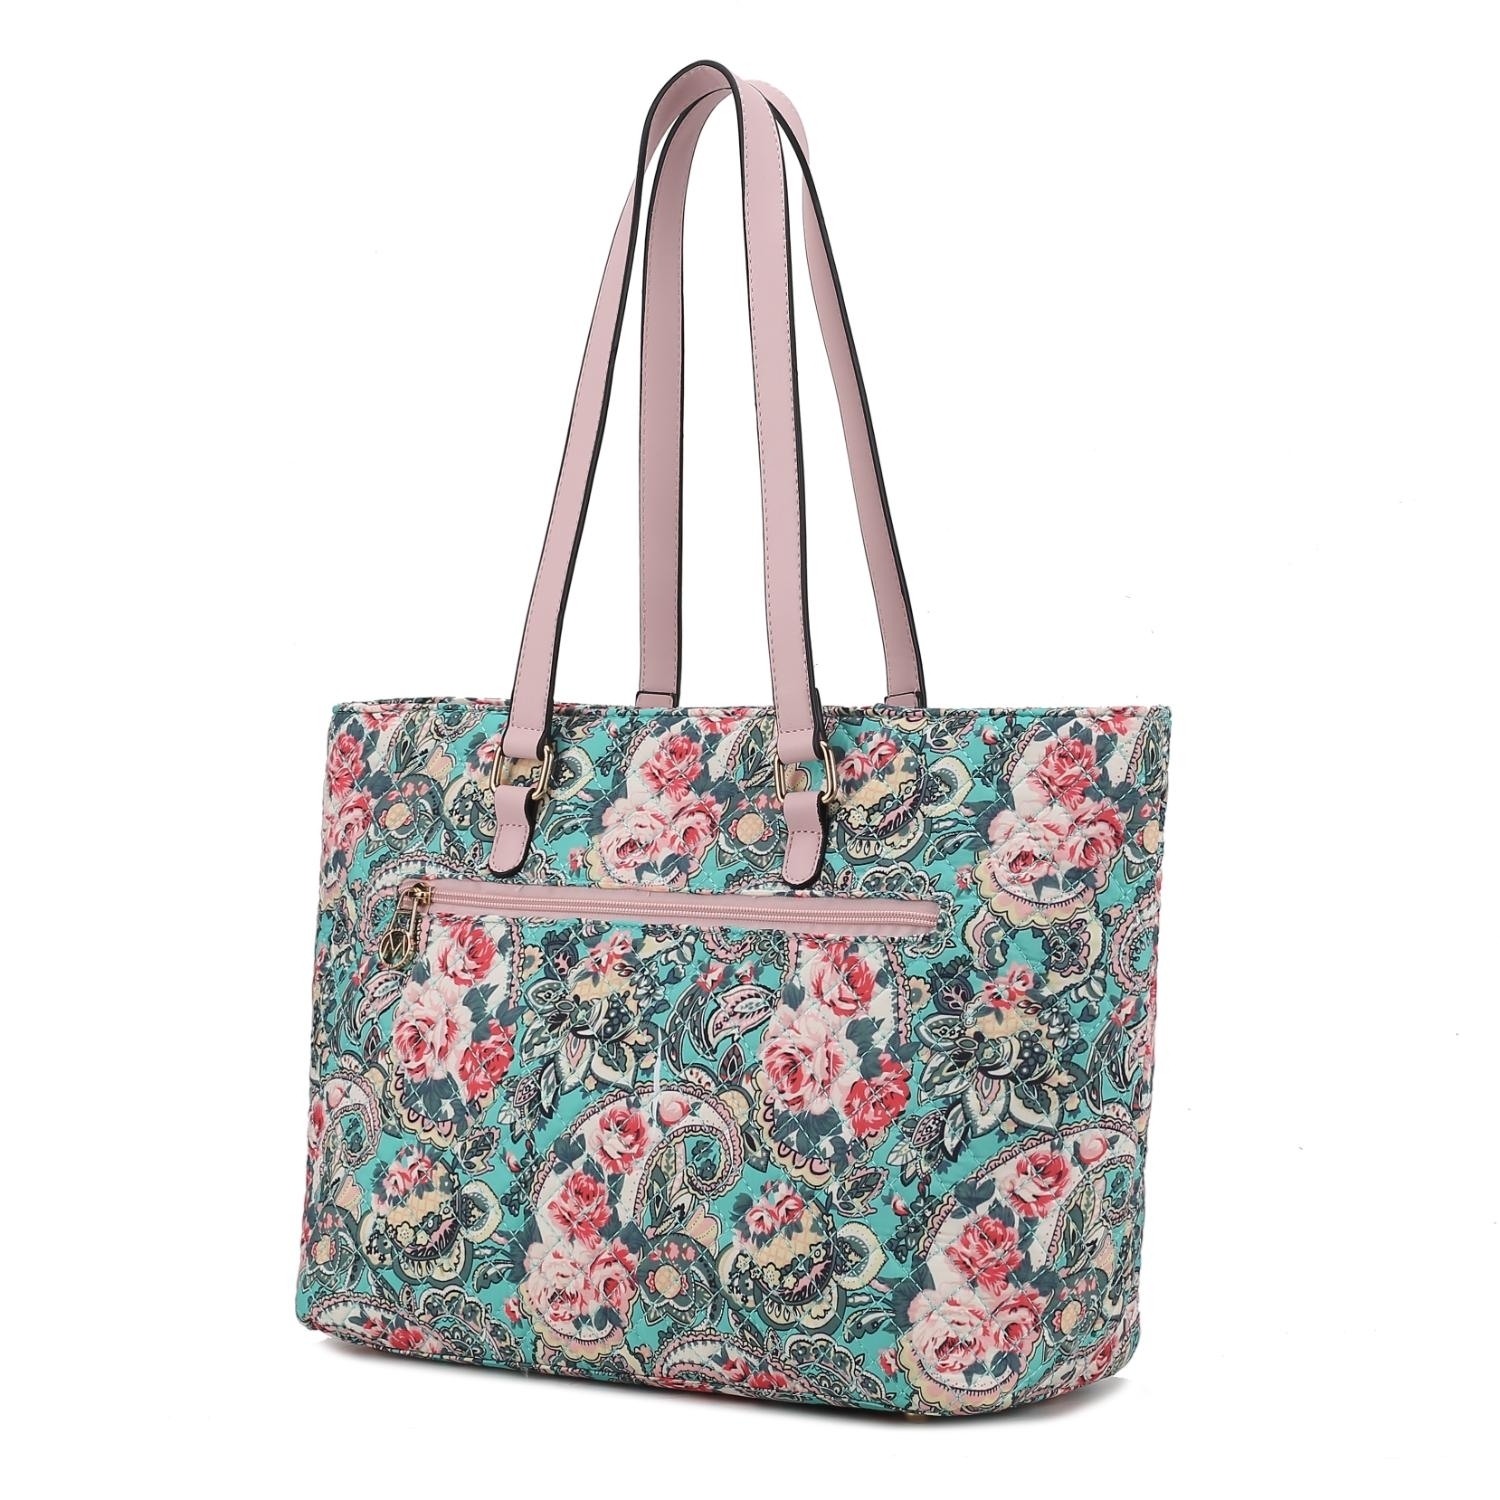 MKF Collection Hallie Quilted Cotton Botanical Pattern Women's Tote Bag By Mia K - Green